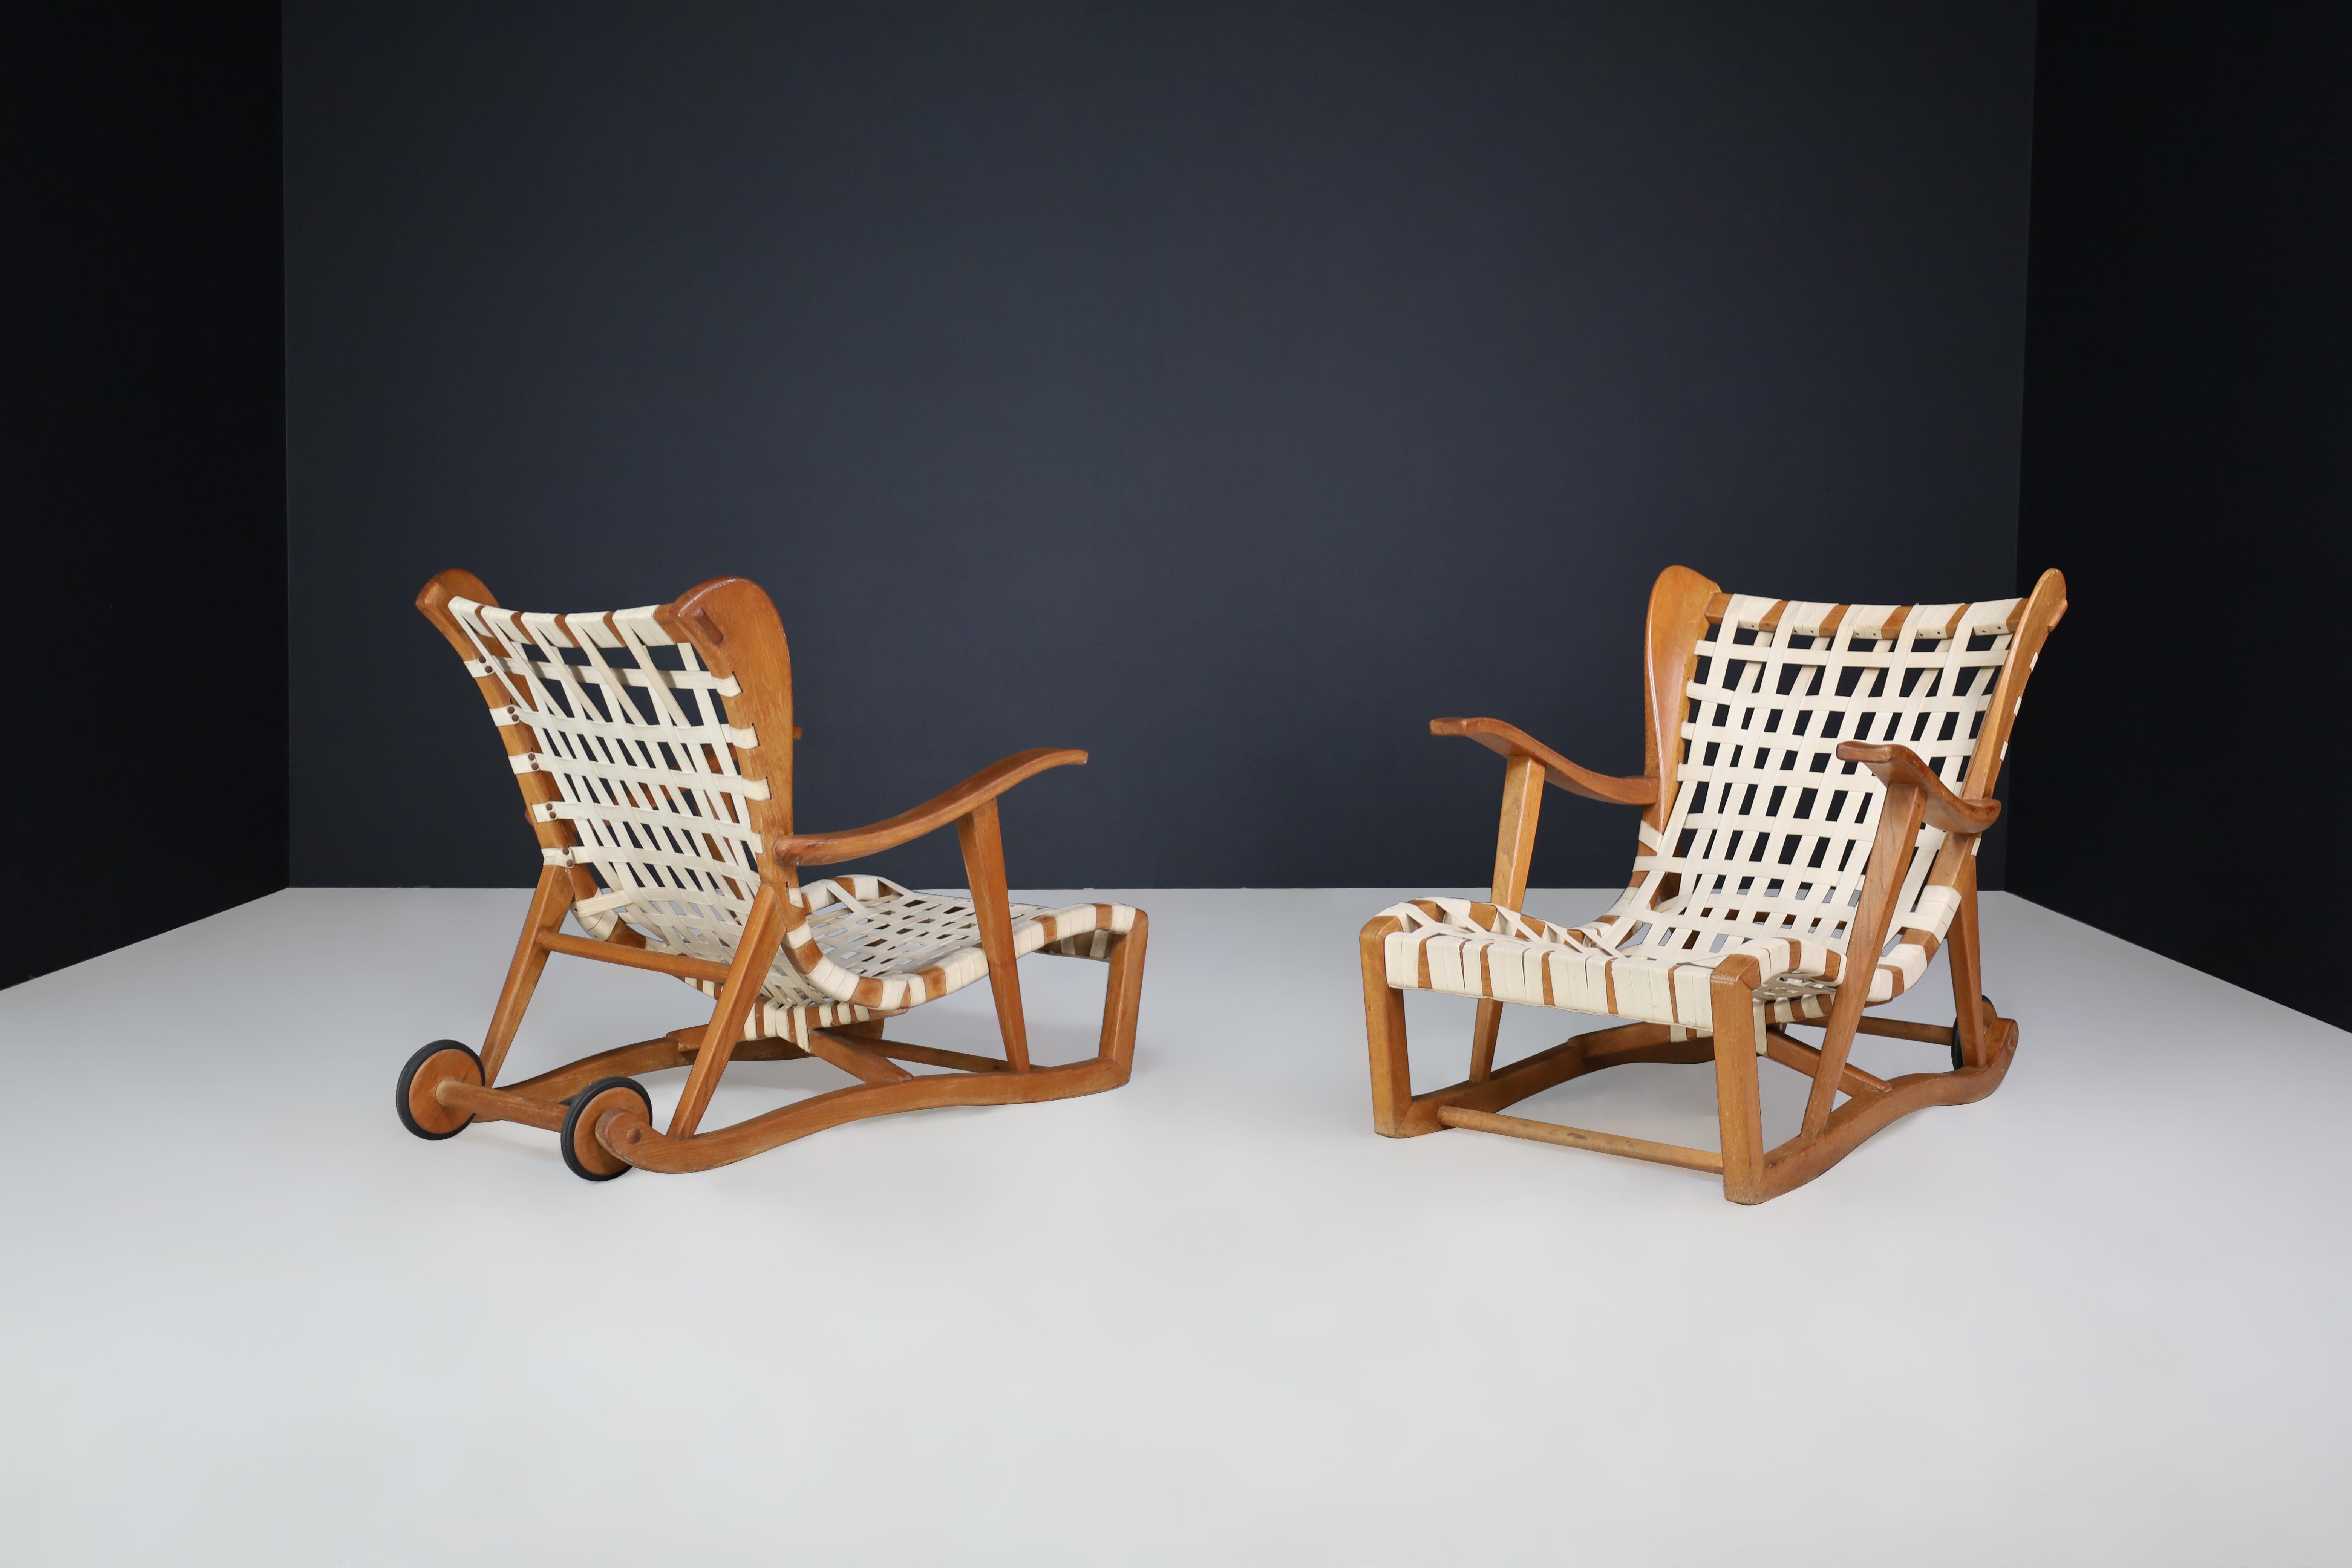 Sculptural Oak Lounge Chair by Guglielmo Pecorini, Italy, the 1950s For Sale 9